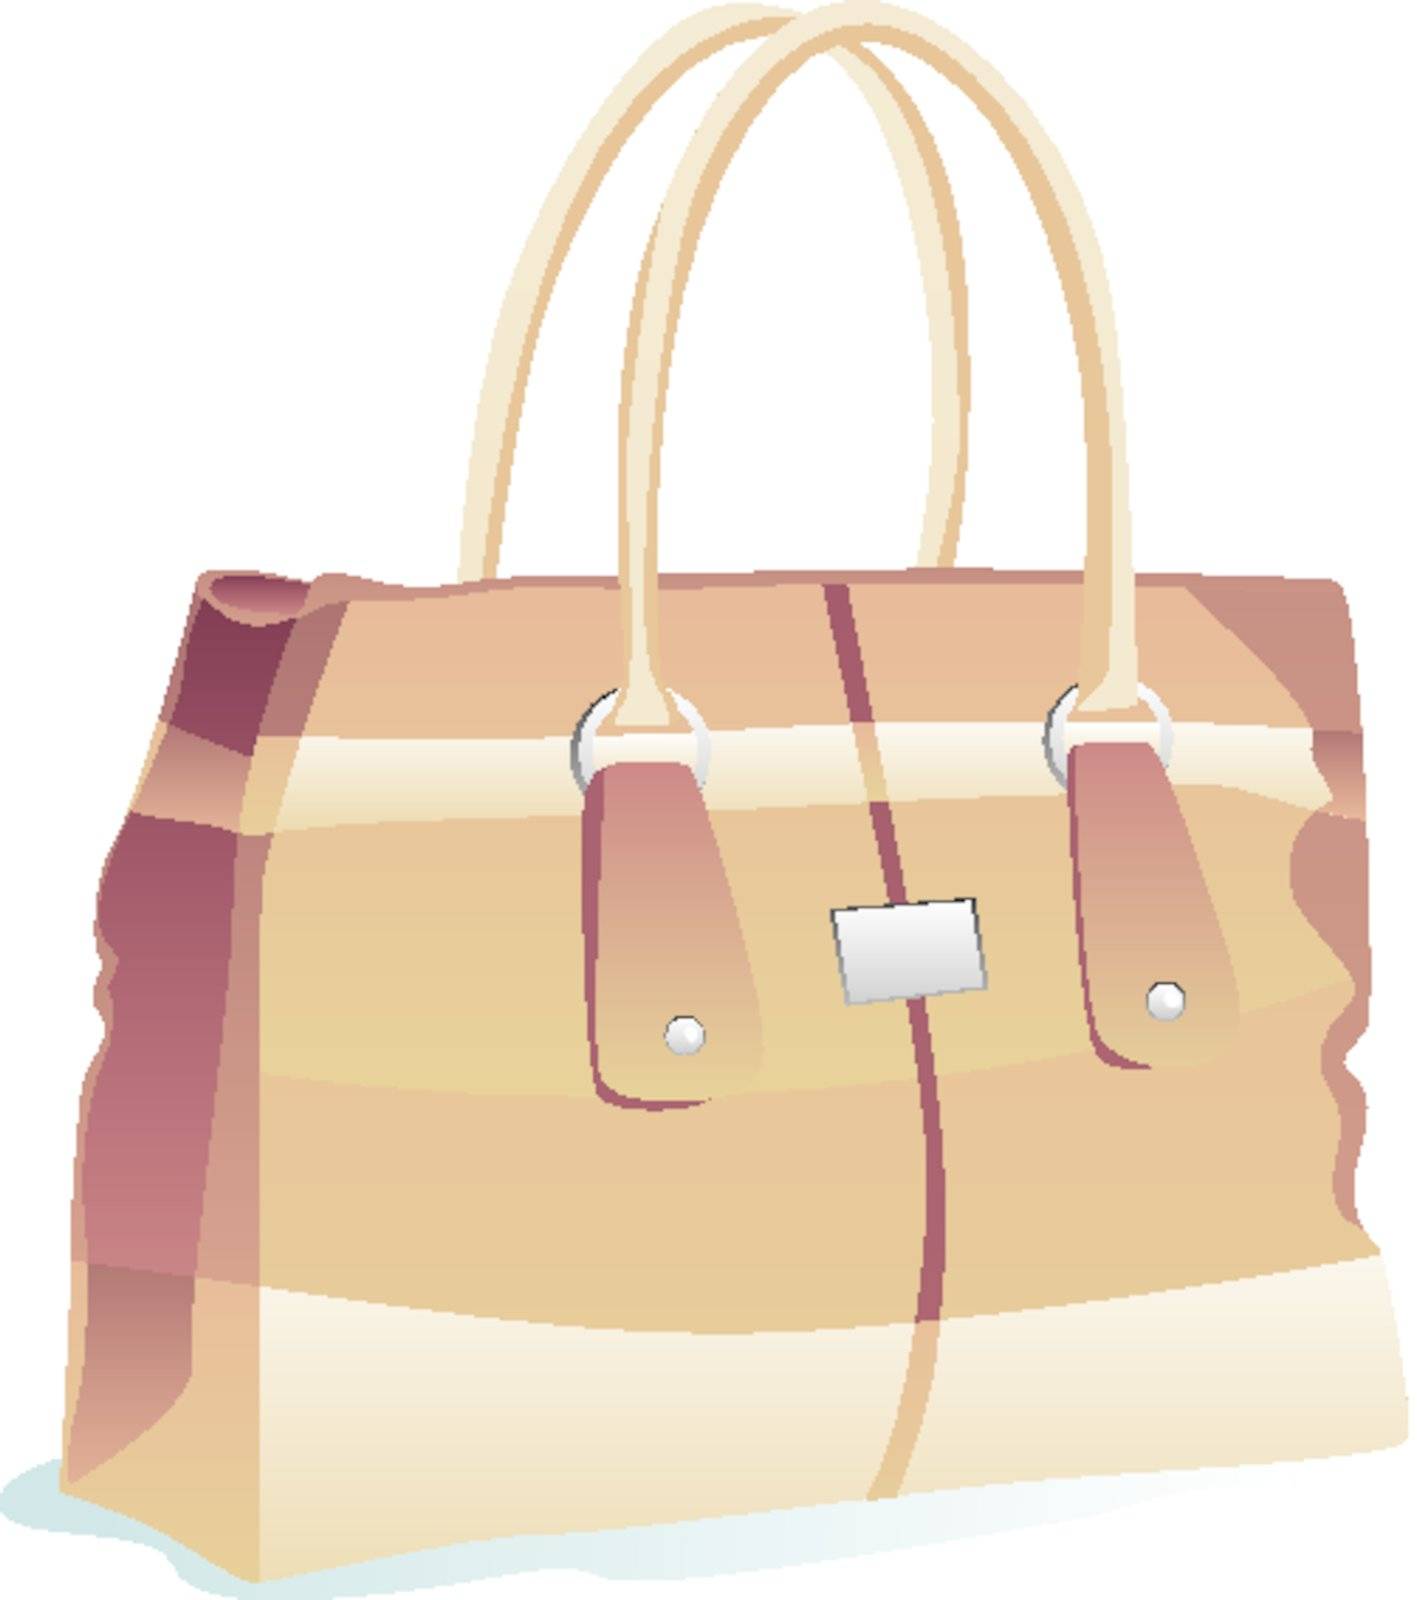 fully editable vector illustration of isolated bag